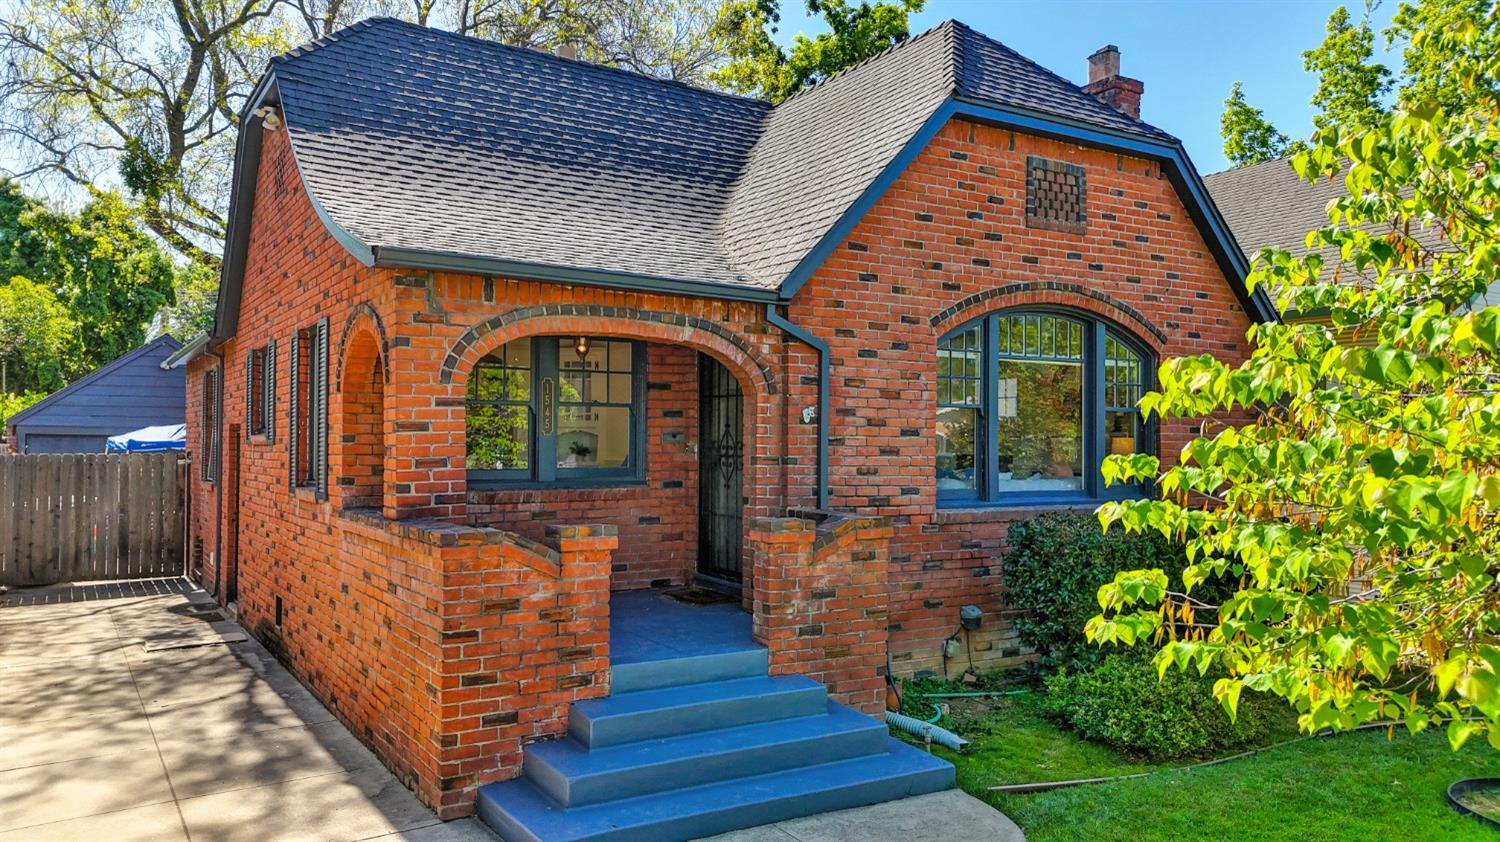 Enchanting 1926 East Sac Brick Tudor!  This adorable 2 bedroom, 1 bath is move-in ready and waiting 